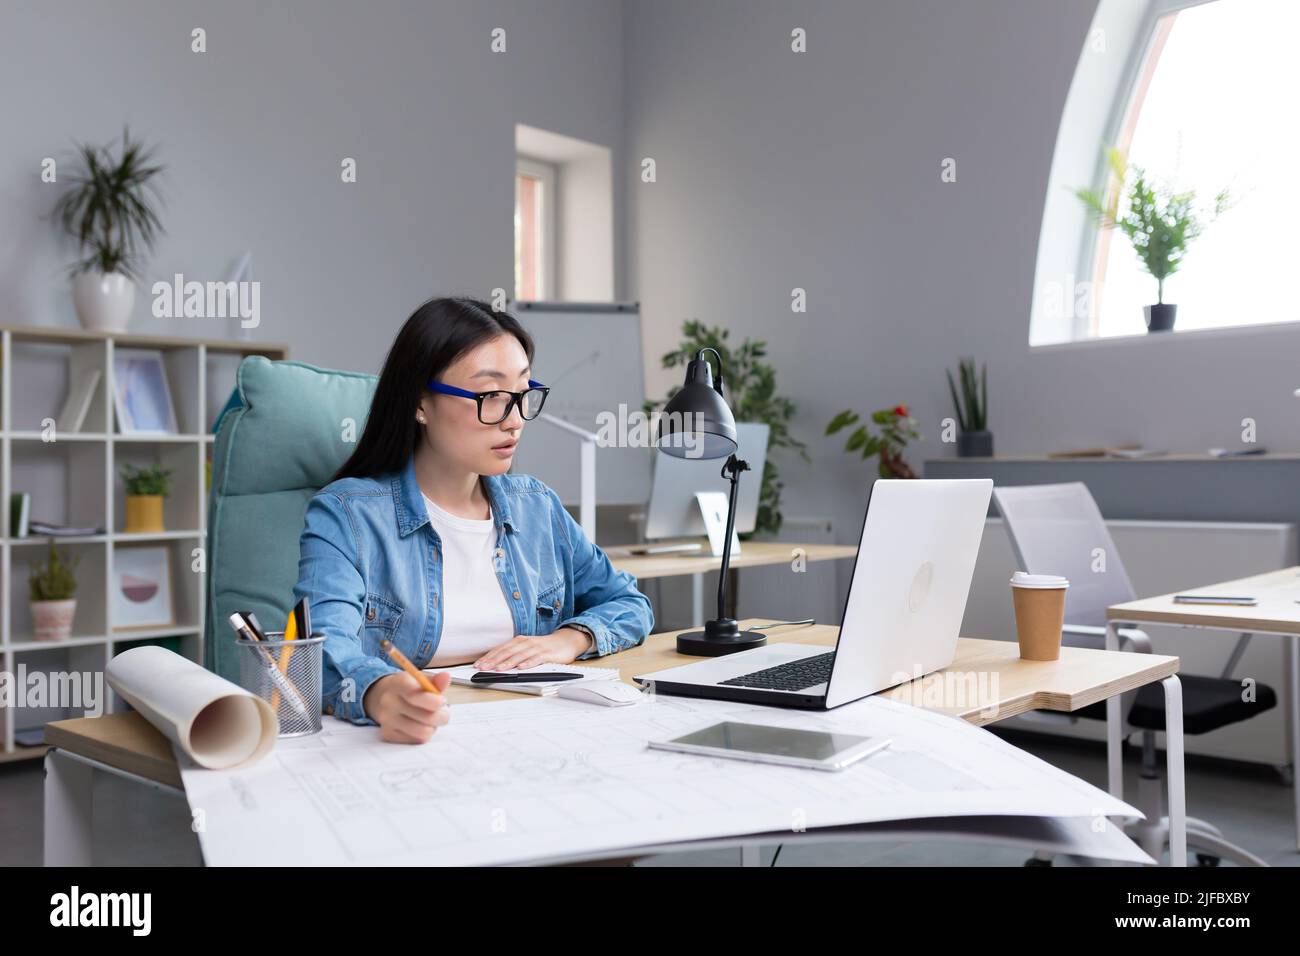 Young beautiful Asian female architect working on a project in an architectural office studio. Stock Photo